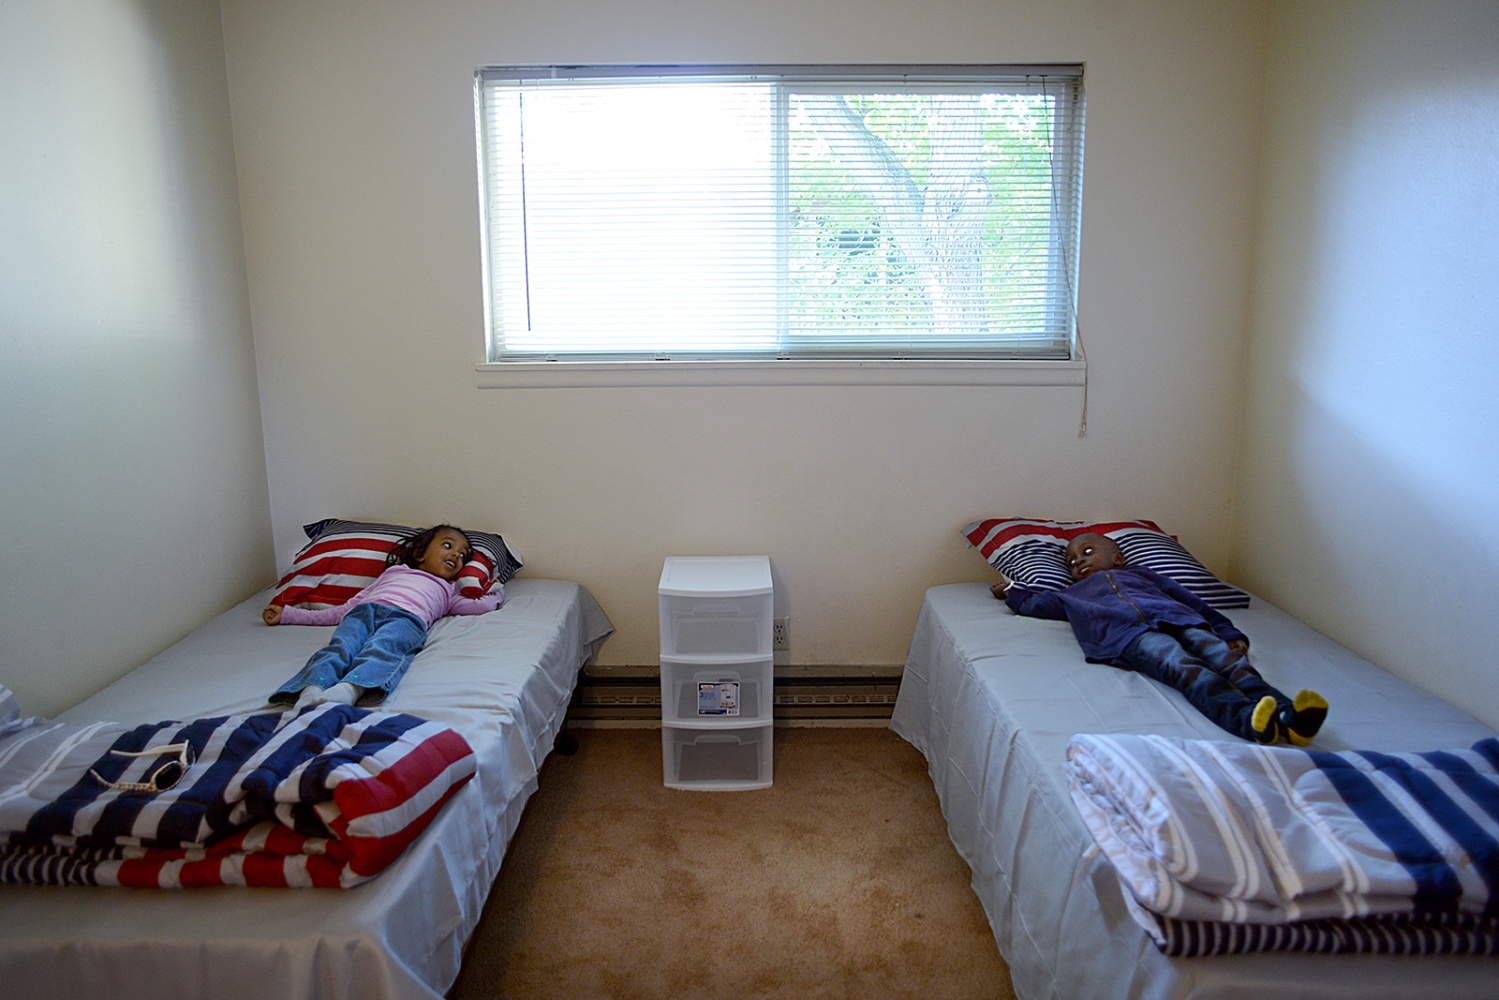 Welcome to Twin Falls, Idaho - Mudather Geddo Giro and his friend try out the beds in...